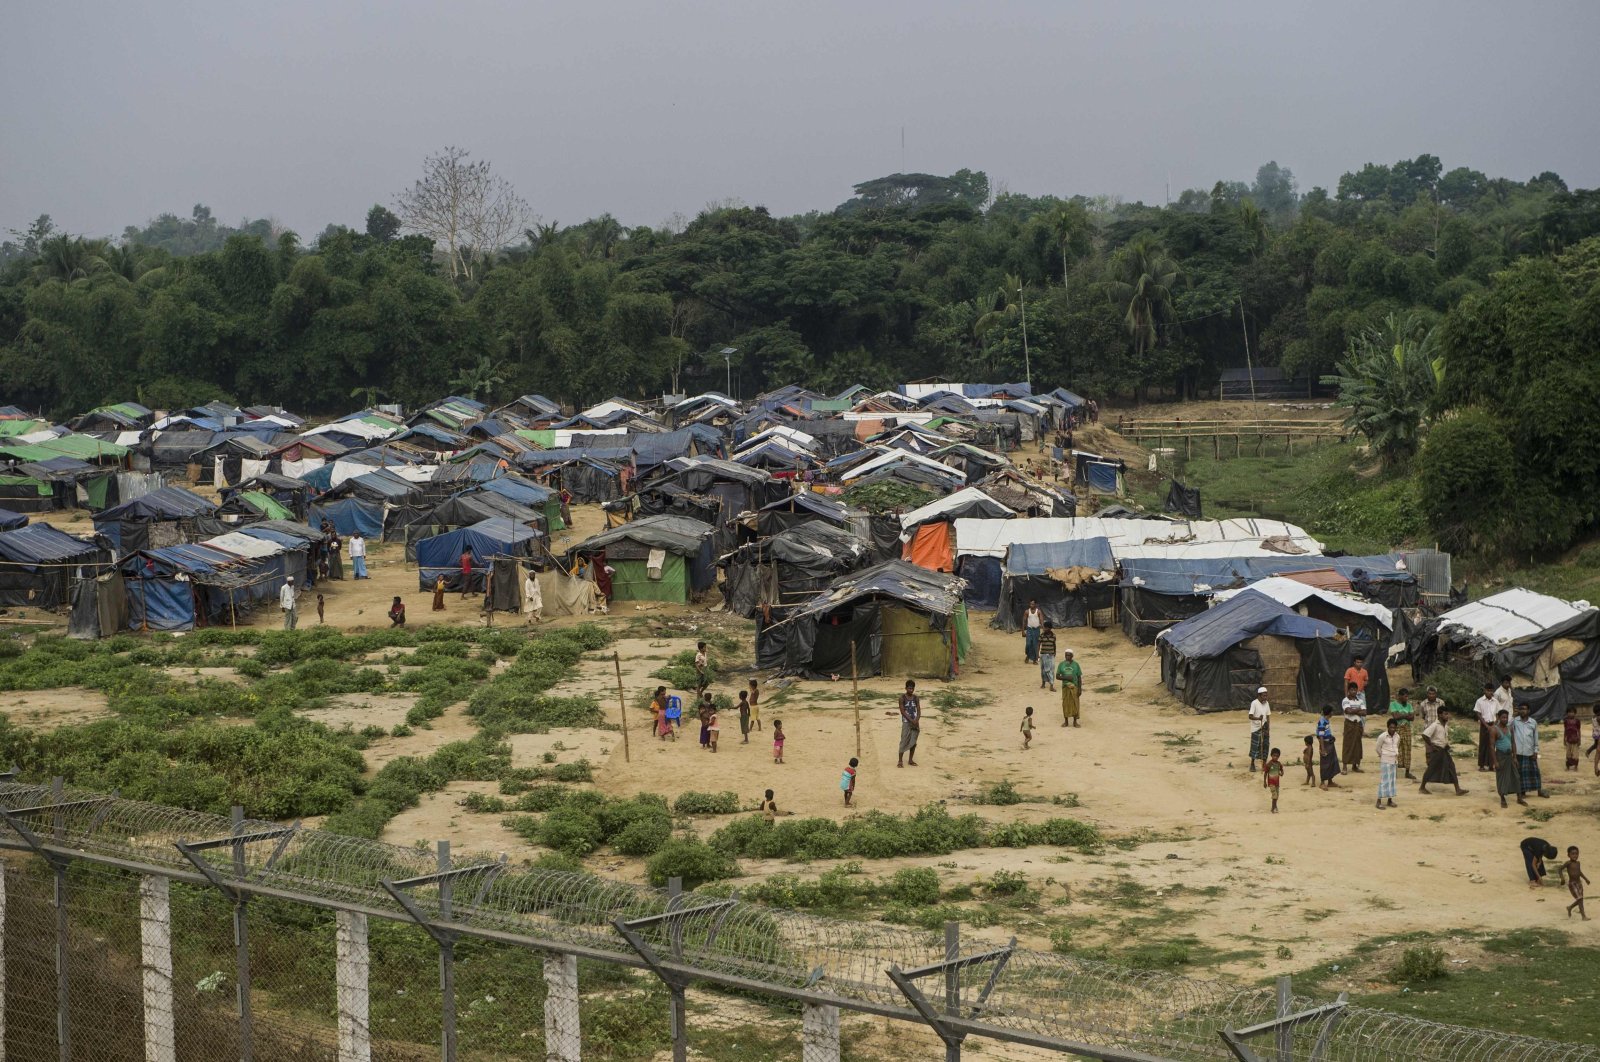 Rohingya refugees gather near their shelters in the "no man's land" behind Myanmar's border lined with barbed wire fences in the Maungdaw district, Rakhine state bordered by Bangladesh, April 25, 2018. (AFP Photo)